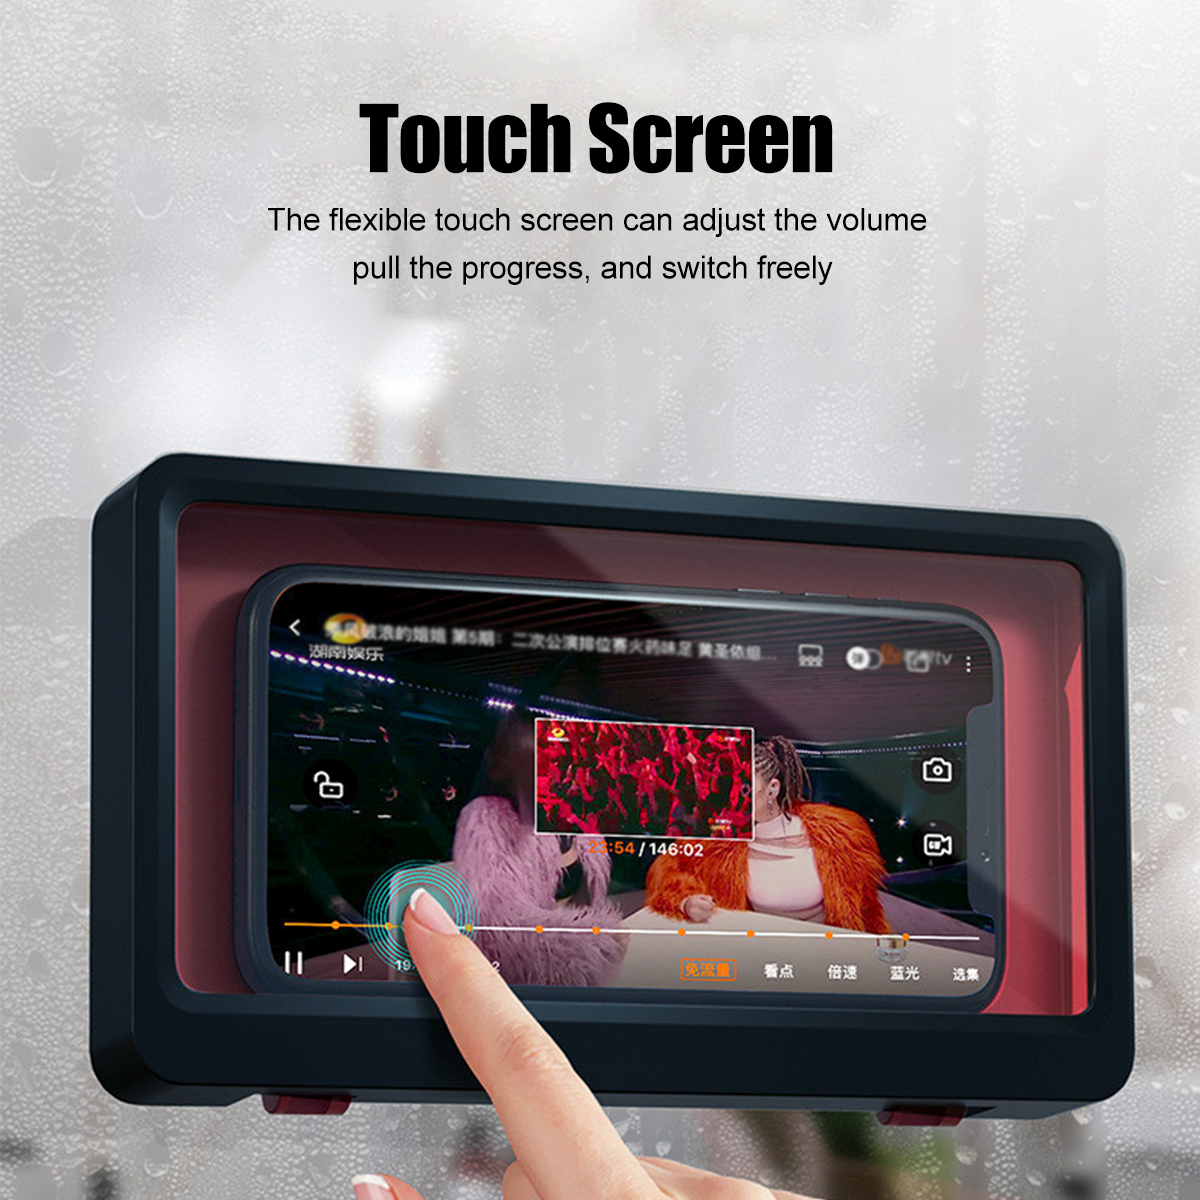 Bathroom-Waterproof-Touch-Screen-Mobile-Cell-Phone-Holder-Case-Wall-Mount-Storage-Box-Under-68-inche-1750862-4